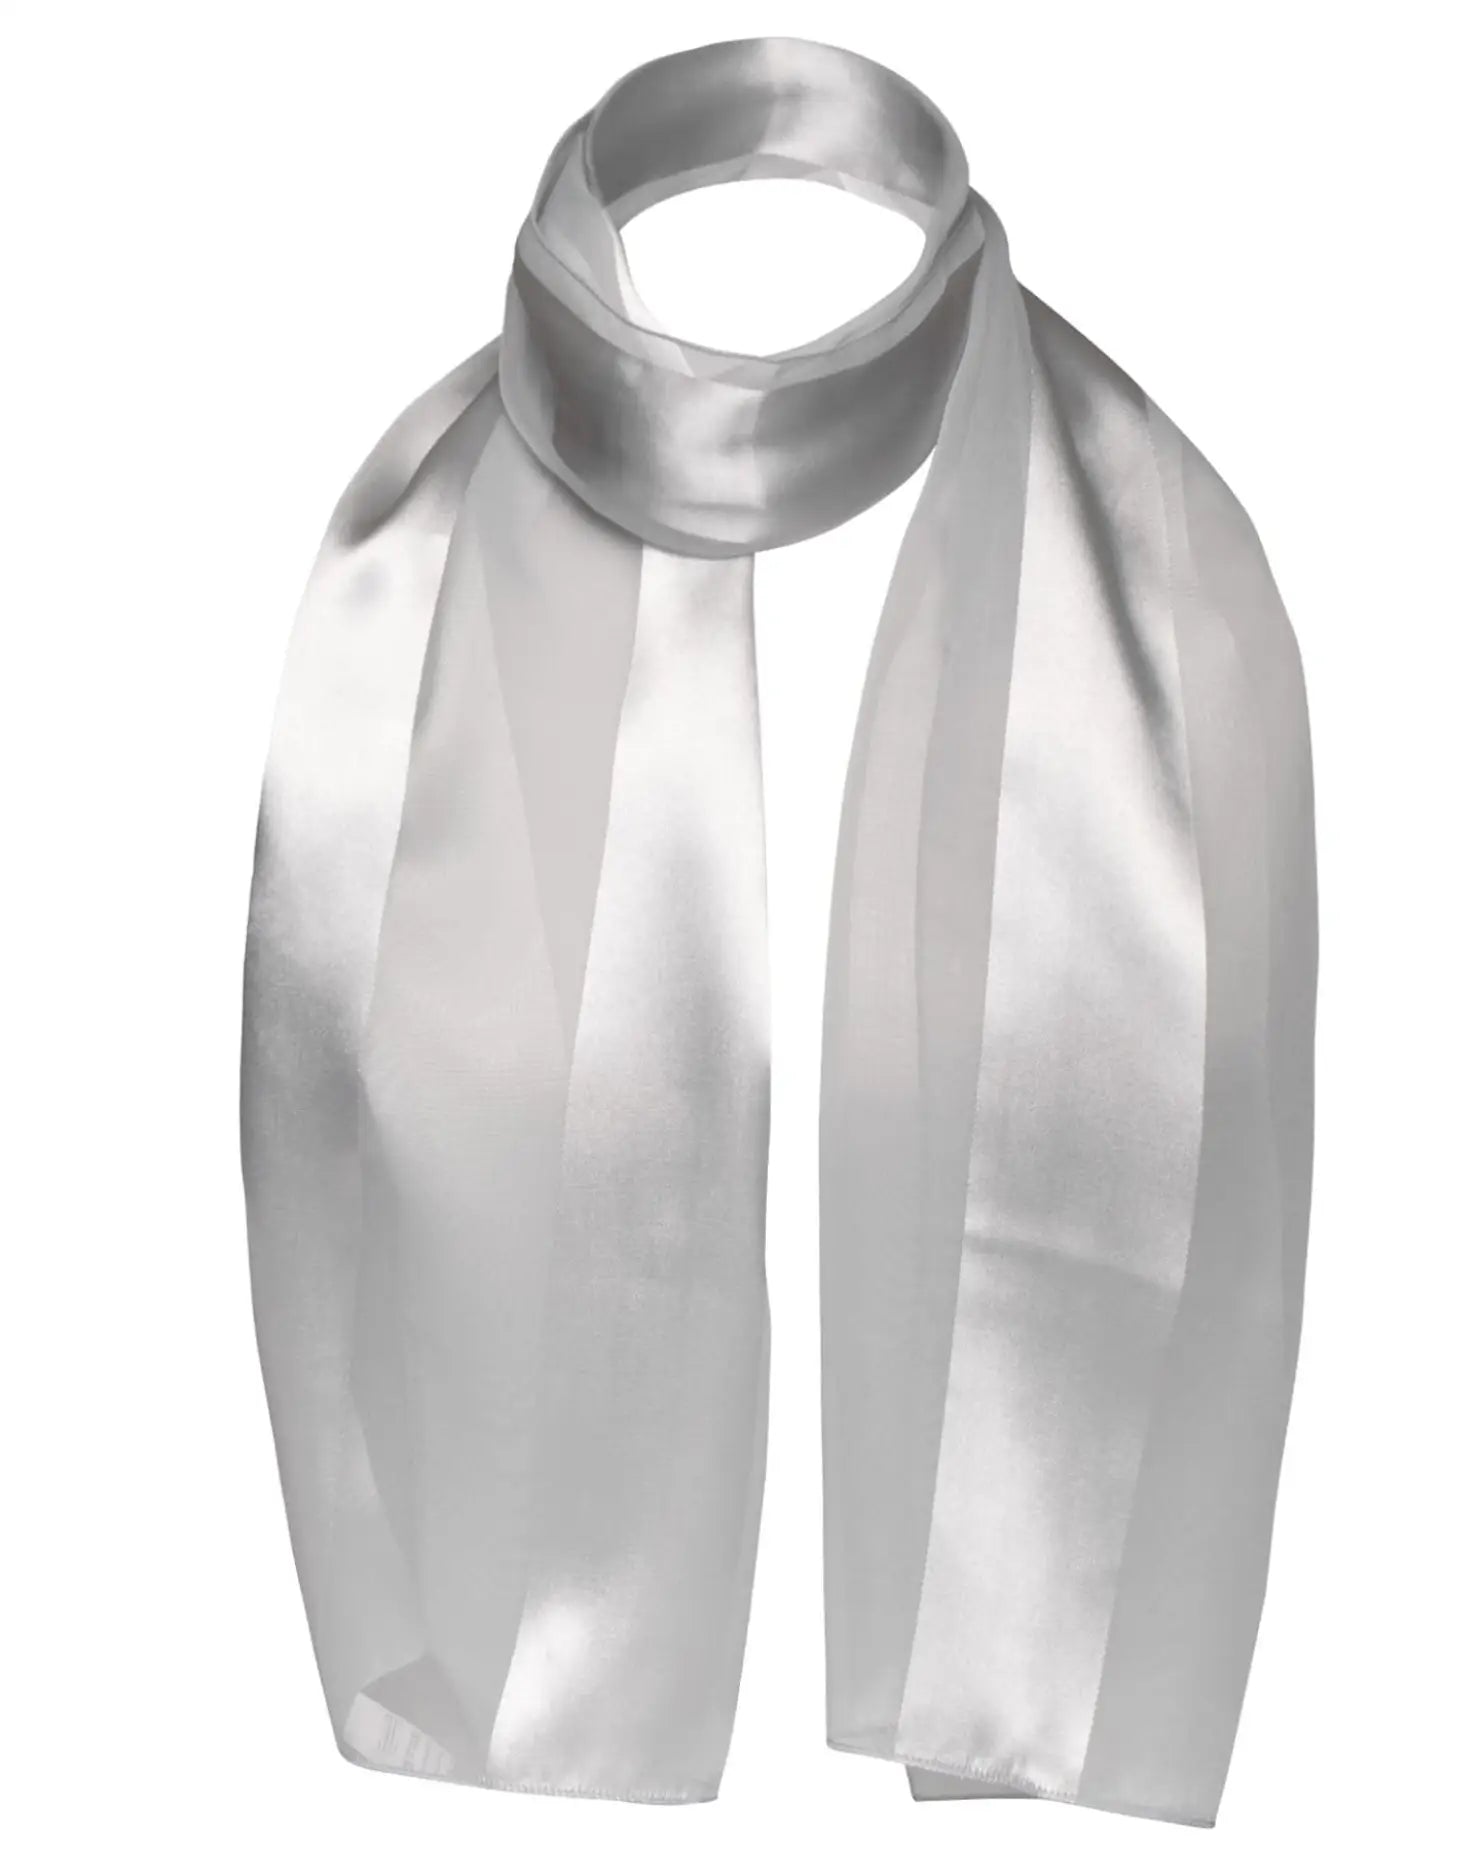 Solid Shimmering Satin Stripe Scarf - Lightweight, white scarf on white background.